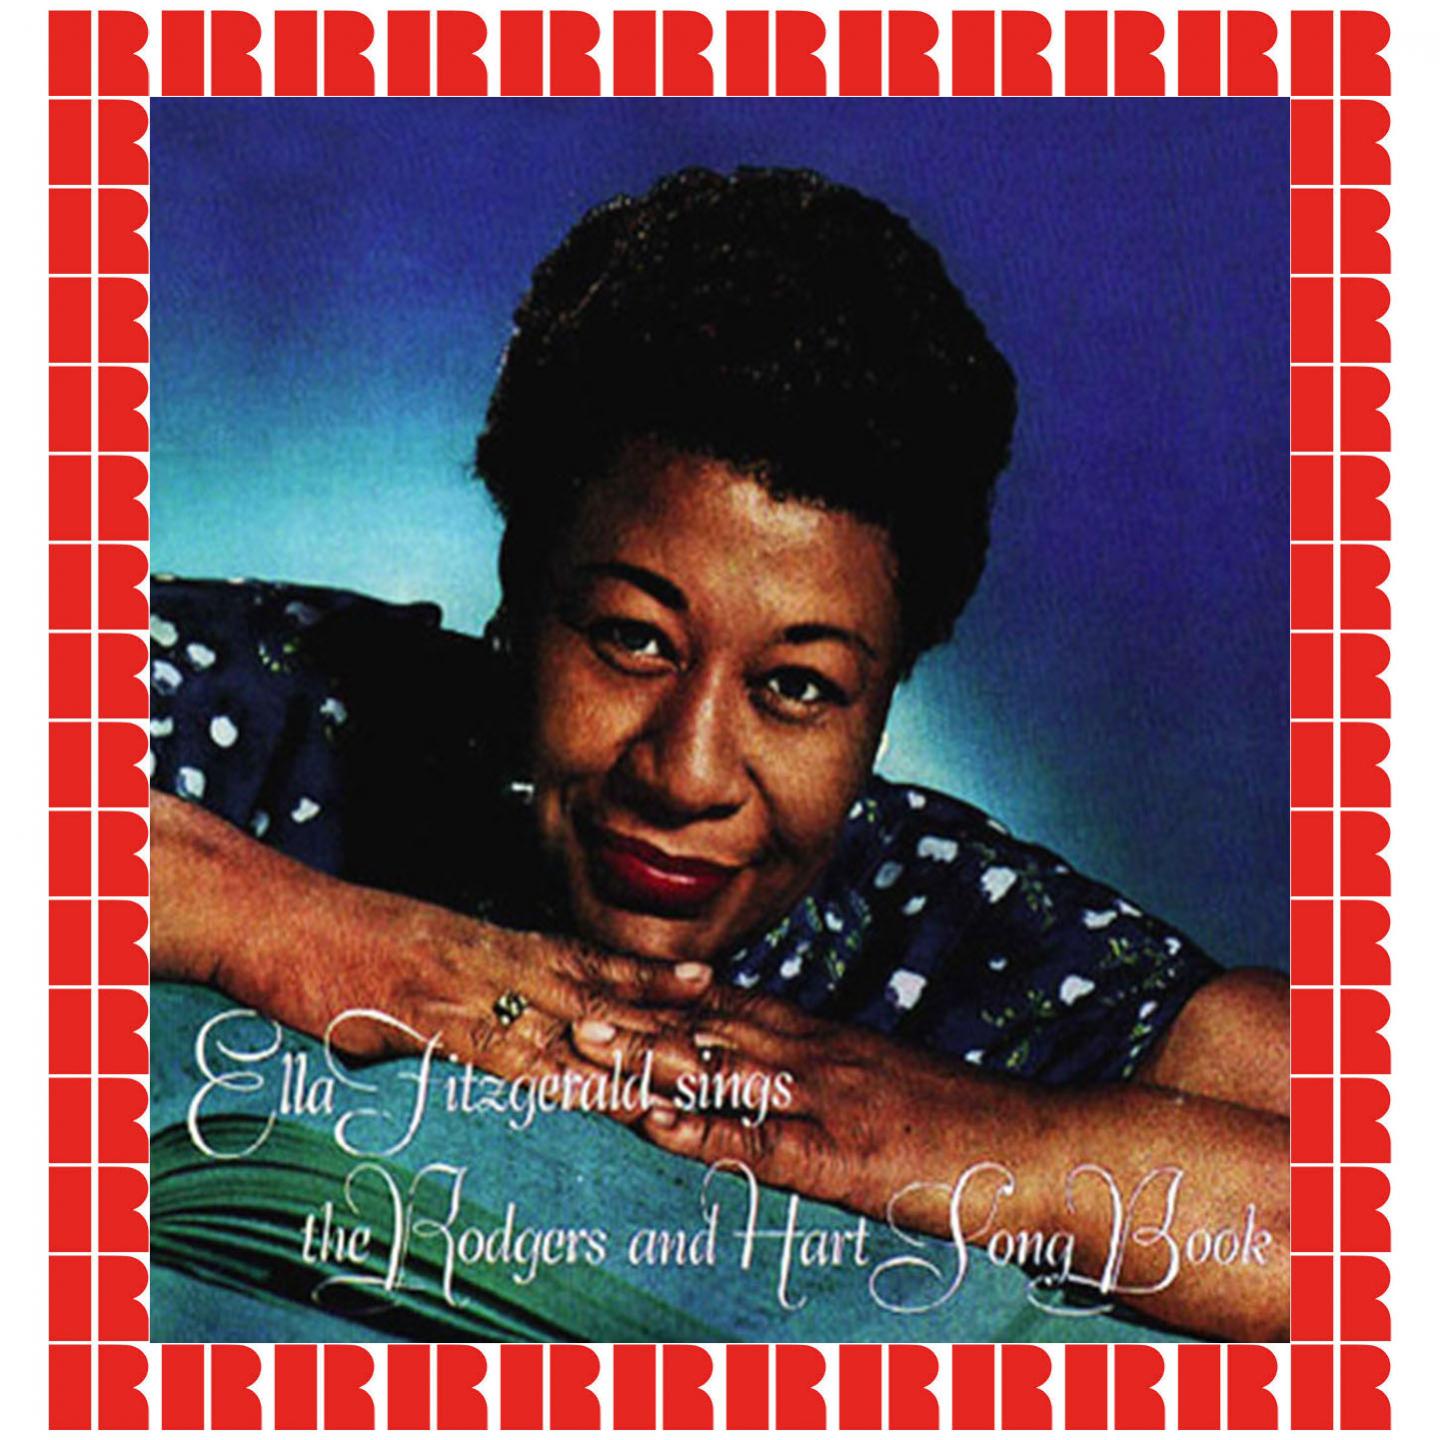 Ella Fitzgerald Sings The Rodgers & Hart Songbook (Hd Remastered Edition)专辑